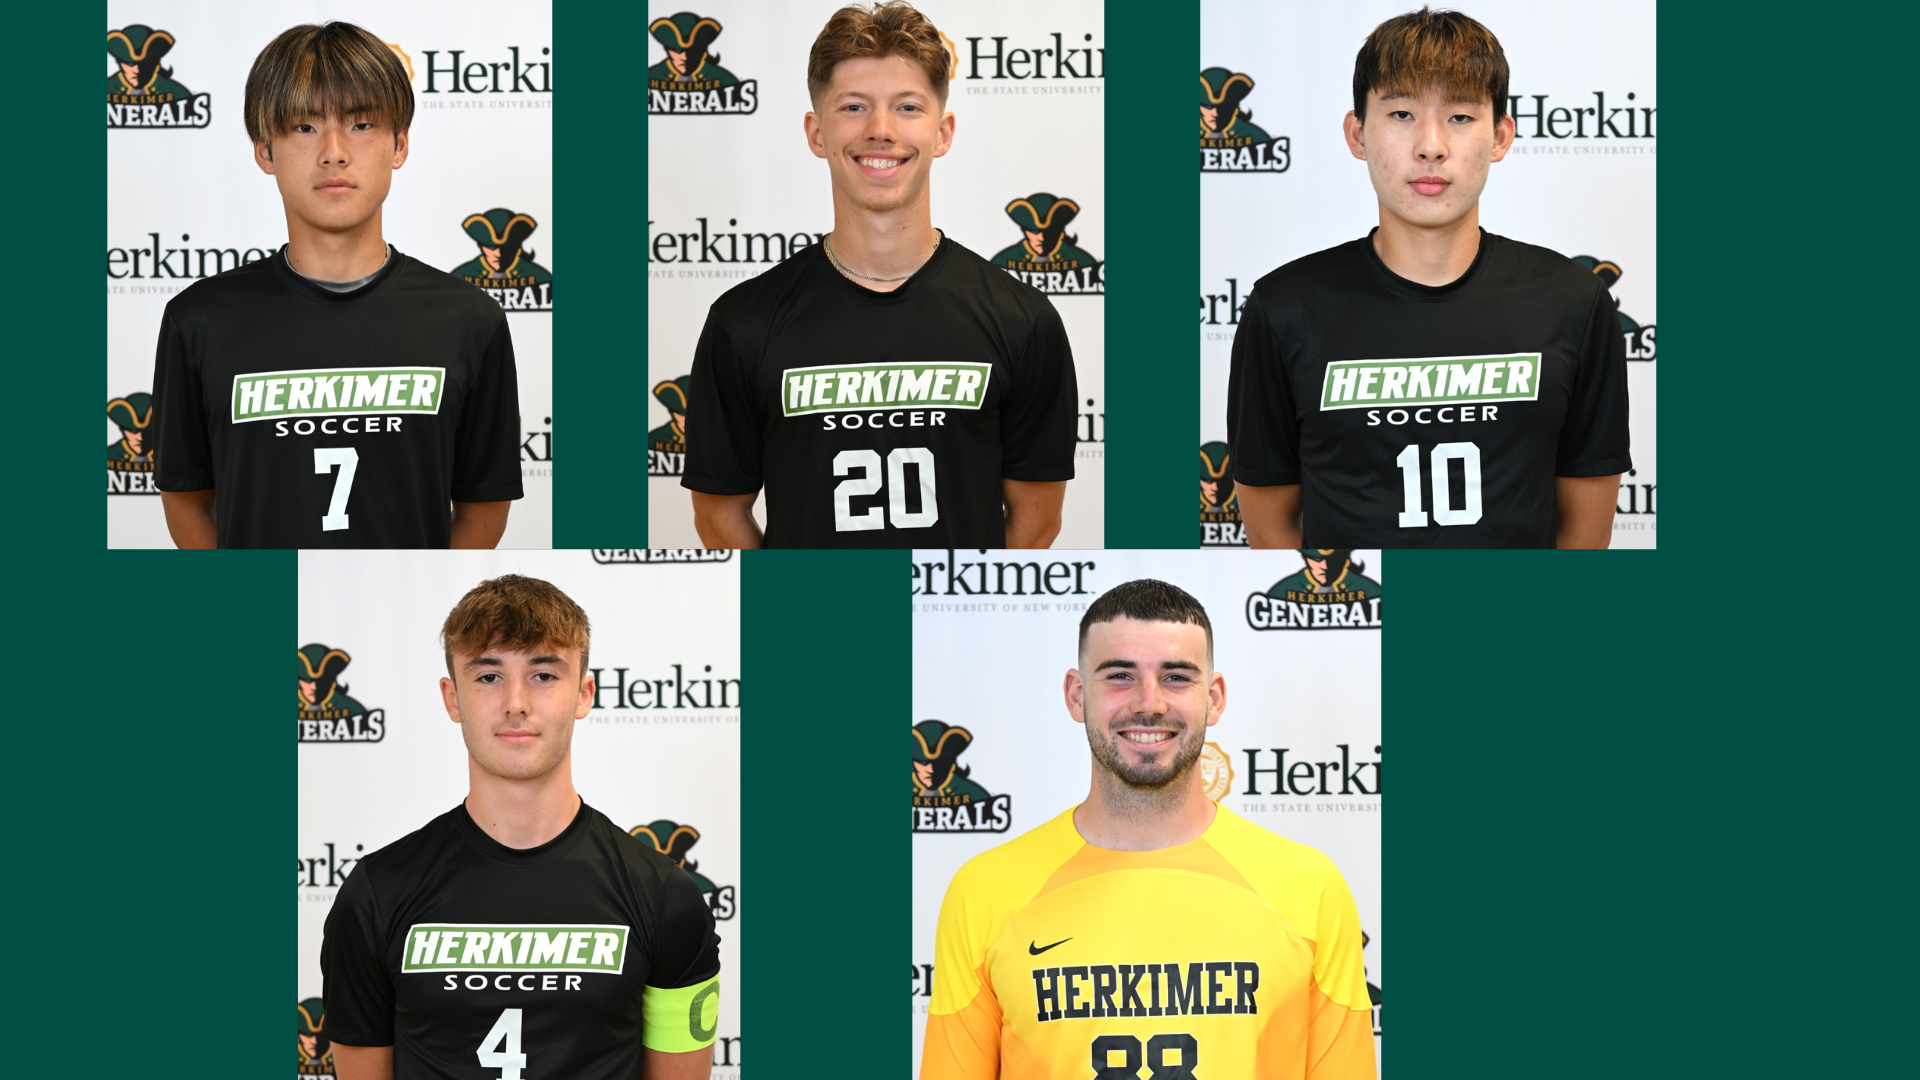 Five Generals Named to United Soccer Coaches Association All-East Region